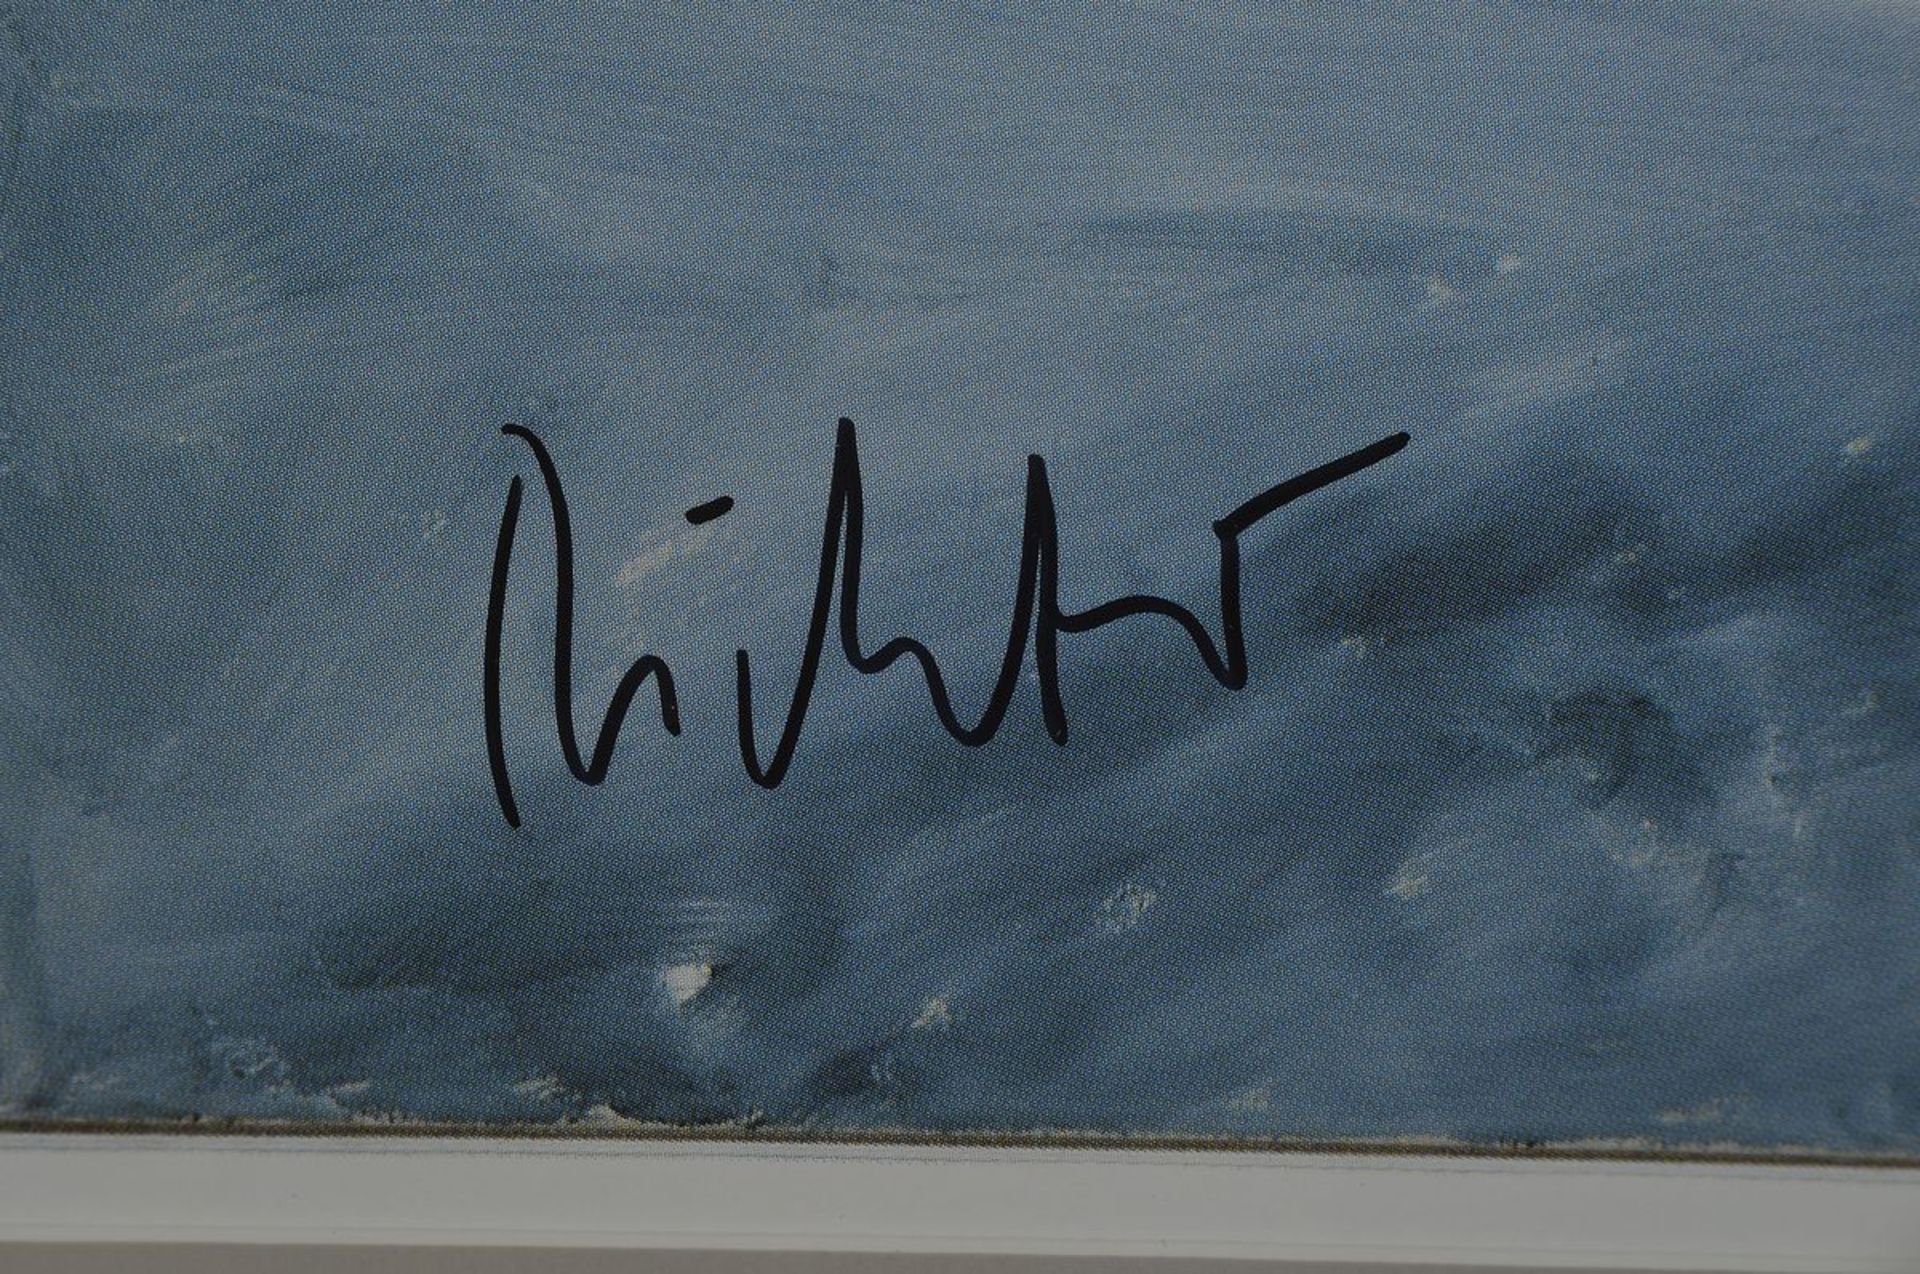 Gerhard Richter, born 1932, offset on paper, signed by hand, only a few signed by hand, 84 x 59.5 - Bild 4 aus 4